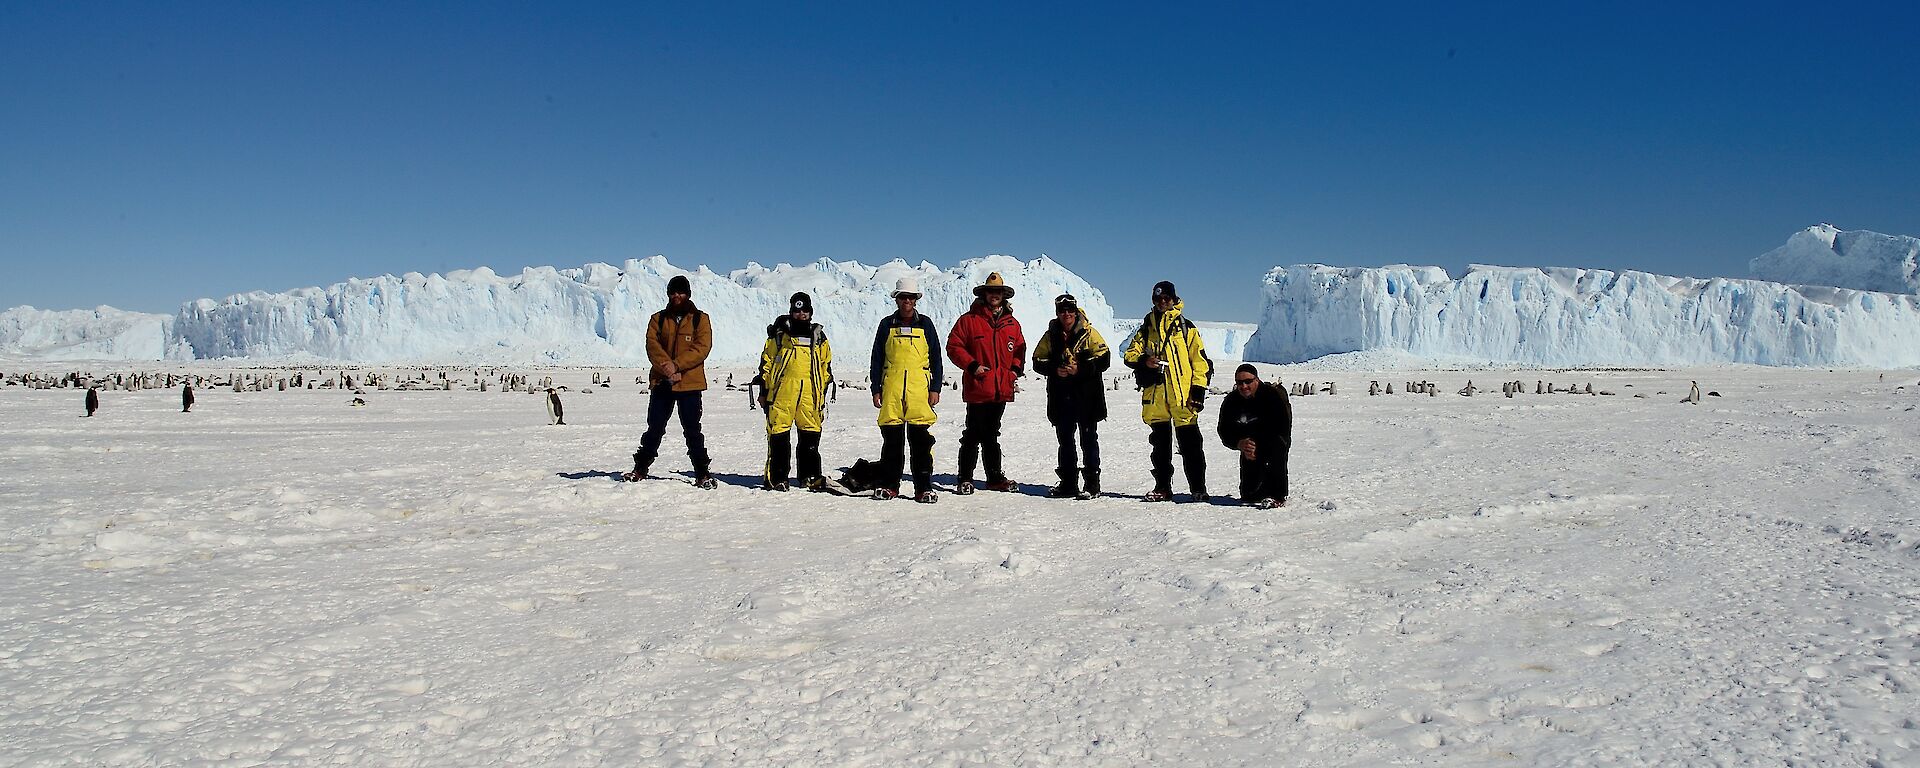 7 people are lined up in front of a penguin rookery with icebergs in the background.